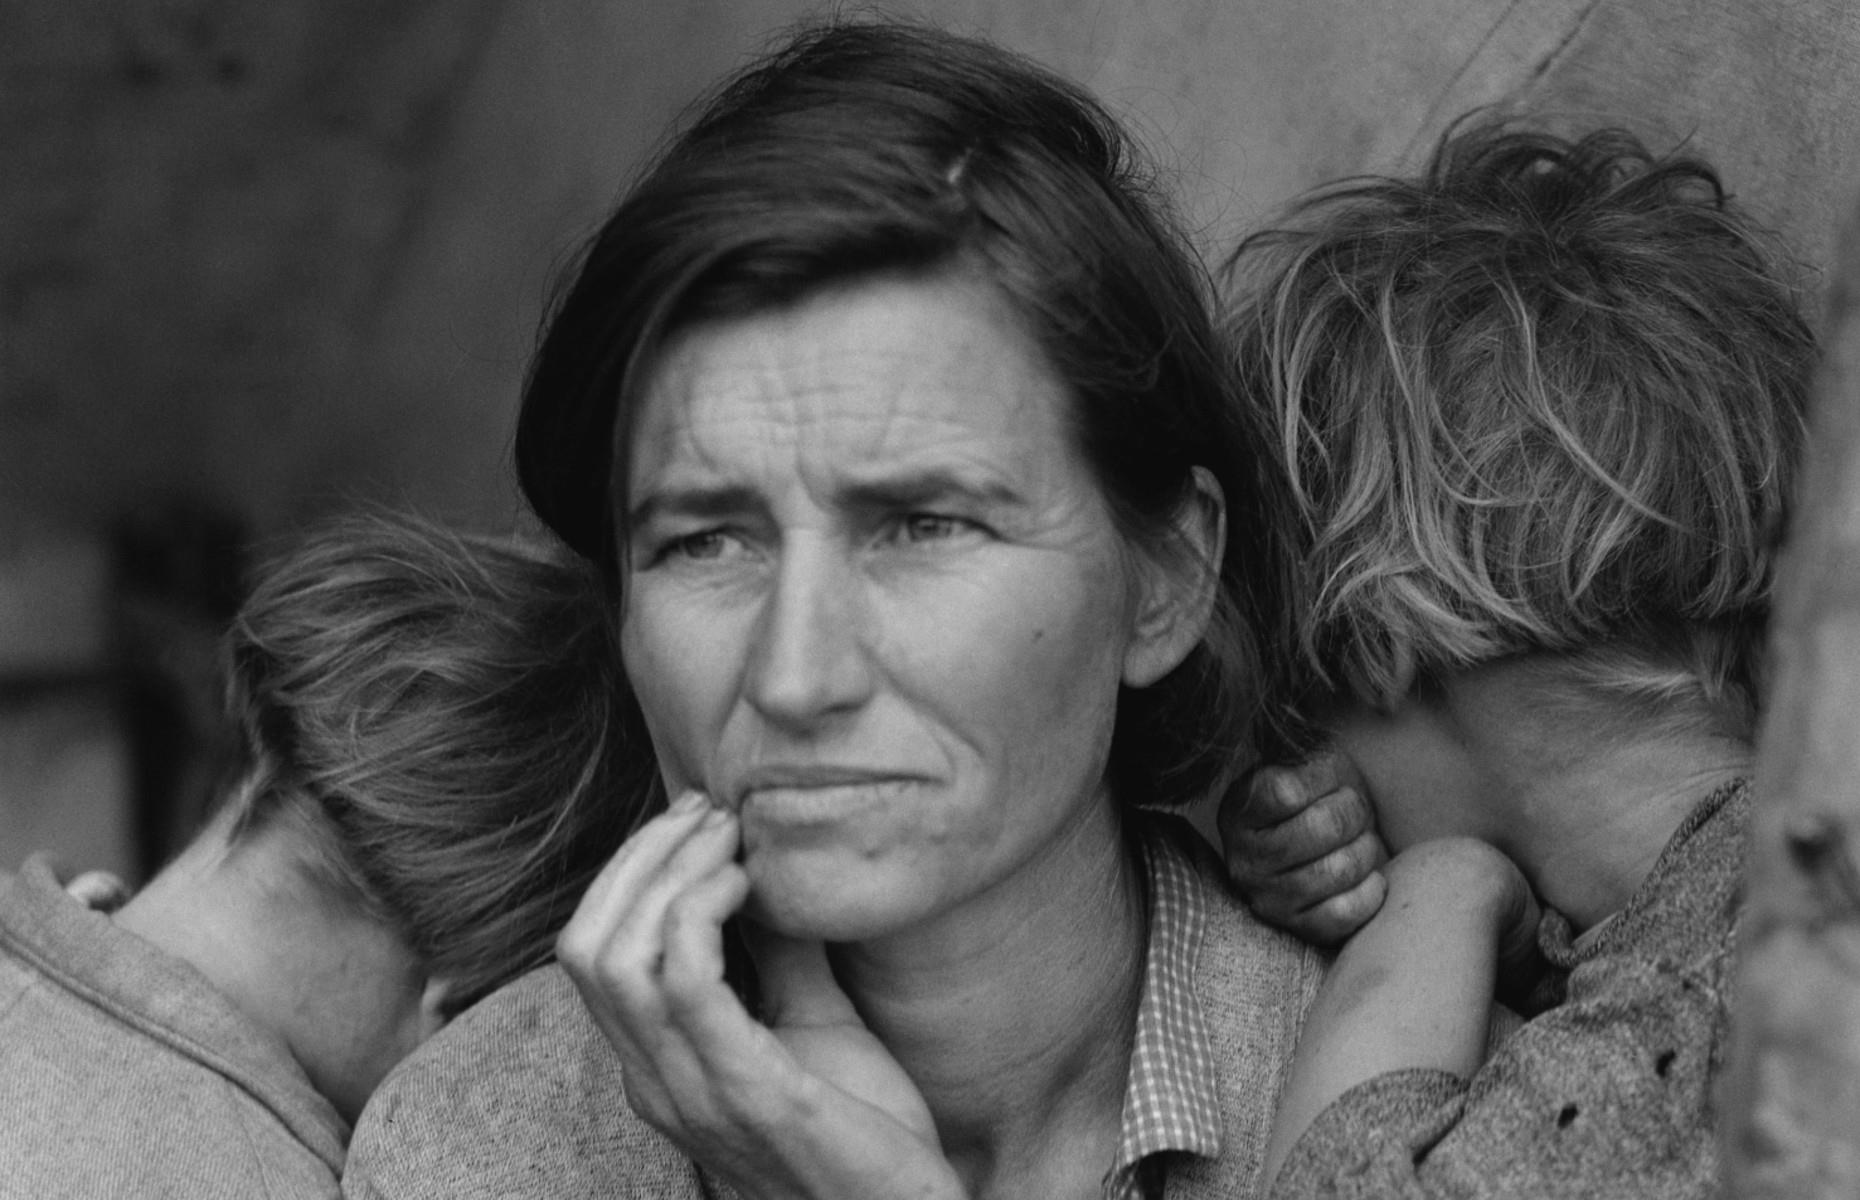 <p>Two and a half million people were forced away from the Dust Bowl states – among them a woman called Florence Thompson who spent time at a migrant camp in Nipomo, California. It was there that famous documentary photographer Dorothea Lange spotted her huddled in a tent with her children and her anxious expression came to epitomize the Depression era.</p>  <p>Thompson had already left the camp by the time she became famous and was only identified in 1978 – until then, she was simply known as Migrant Mother.</p>